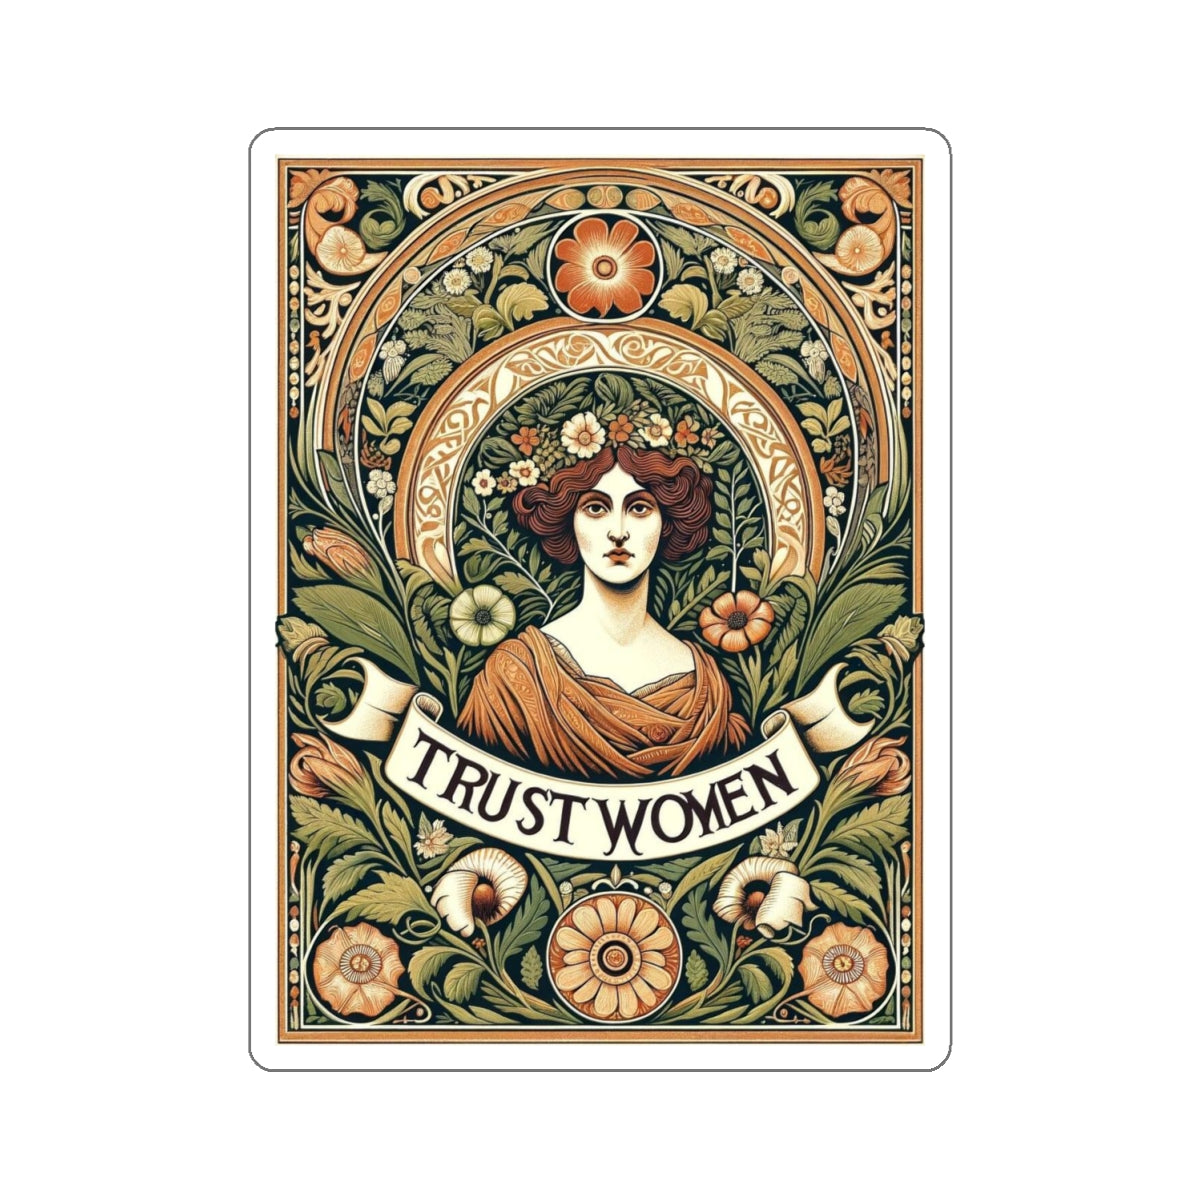 Inspirational Statement vinyl Sticker/Decal: Trust Women! for laptop, kindle, phone, ipad, instrument case, notebook, mood board, or wall